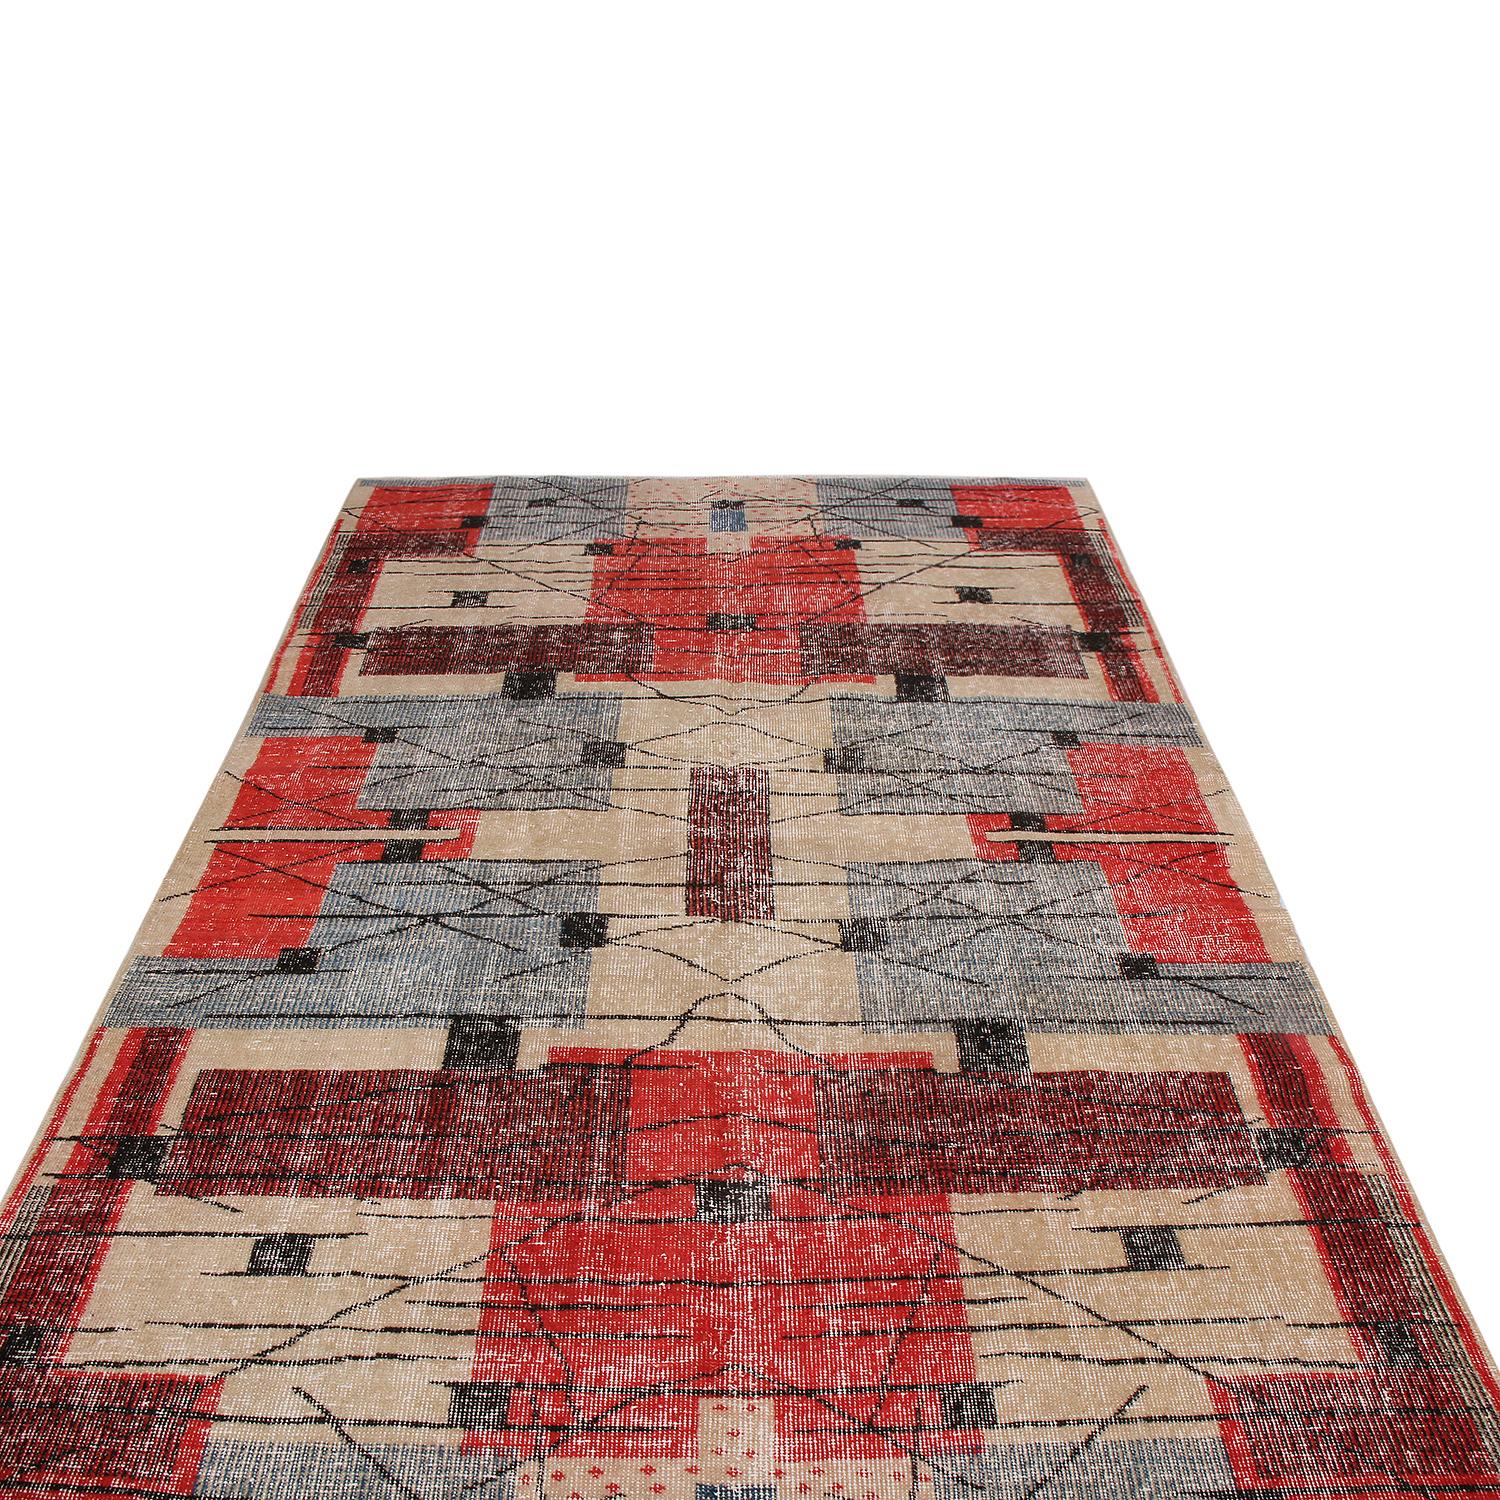 Hand knotted in Turkey originating between 1960-1970, this vintage midcentury runner joins our Mid-Century Pasha collection celebrating Turkish icon Zeki Müren with Josh’s hand picked favorites from this period. One of his most European-inspired